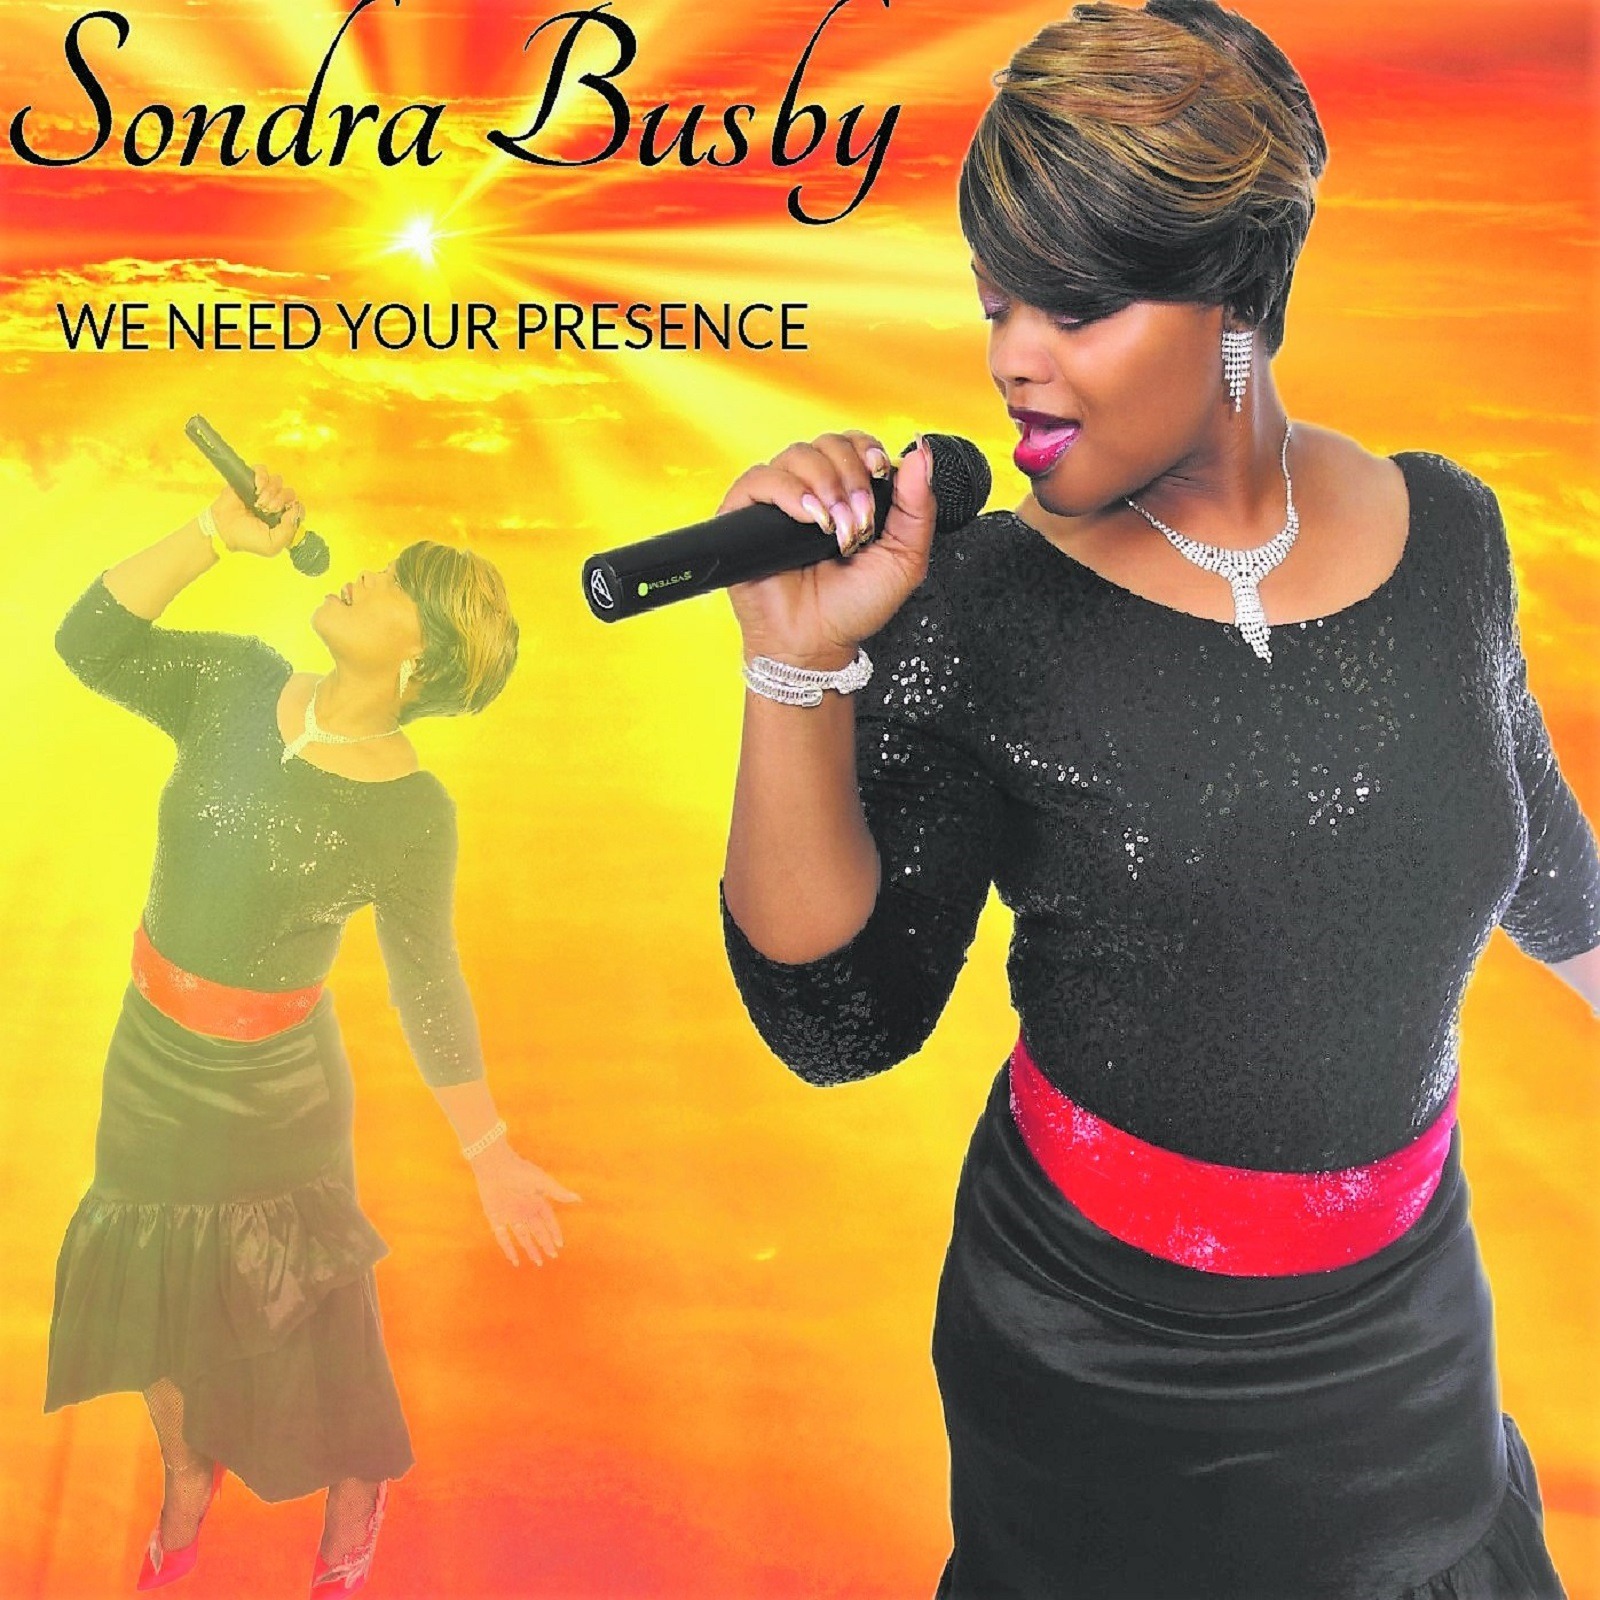 A Soul-Stirring Testimony of God’s Grace, Healing and Delivering Power - Sondra Busby Unveils Passionate Gospel Album